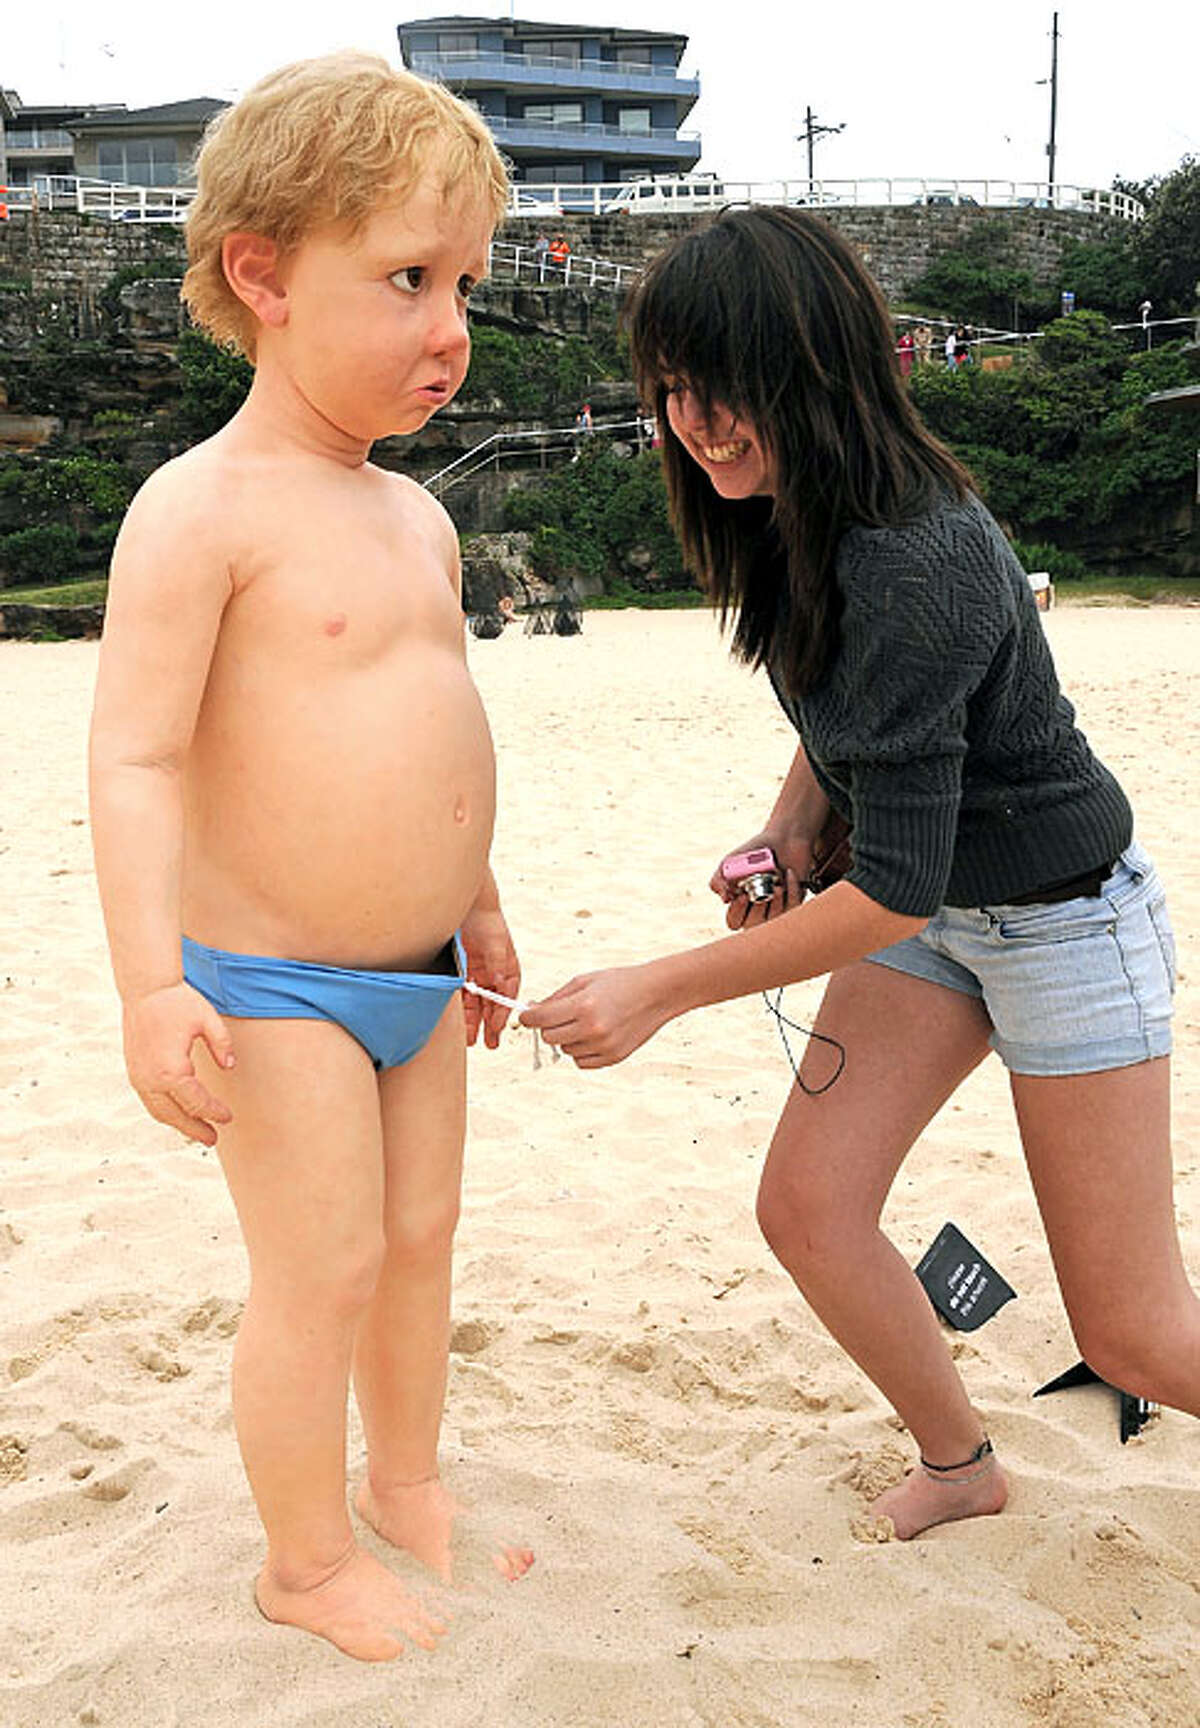 Curiousity gets the better of an admirer of the silicon and fibreglass work 'Little Lost Boy' by Australian artist Paul Trefry after overly-cautious organisers put a swimming costume on the figure for the official launch of the 13th Sculpture By The Sea exhibition on Sydney's Tamarama Beach on October 29, 2009. The annual outdoor display features sculptures by 114 Australian and international artists and is expected to attract over 600,000 visitors before closing on November 15.